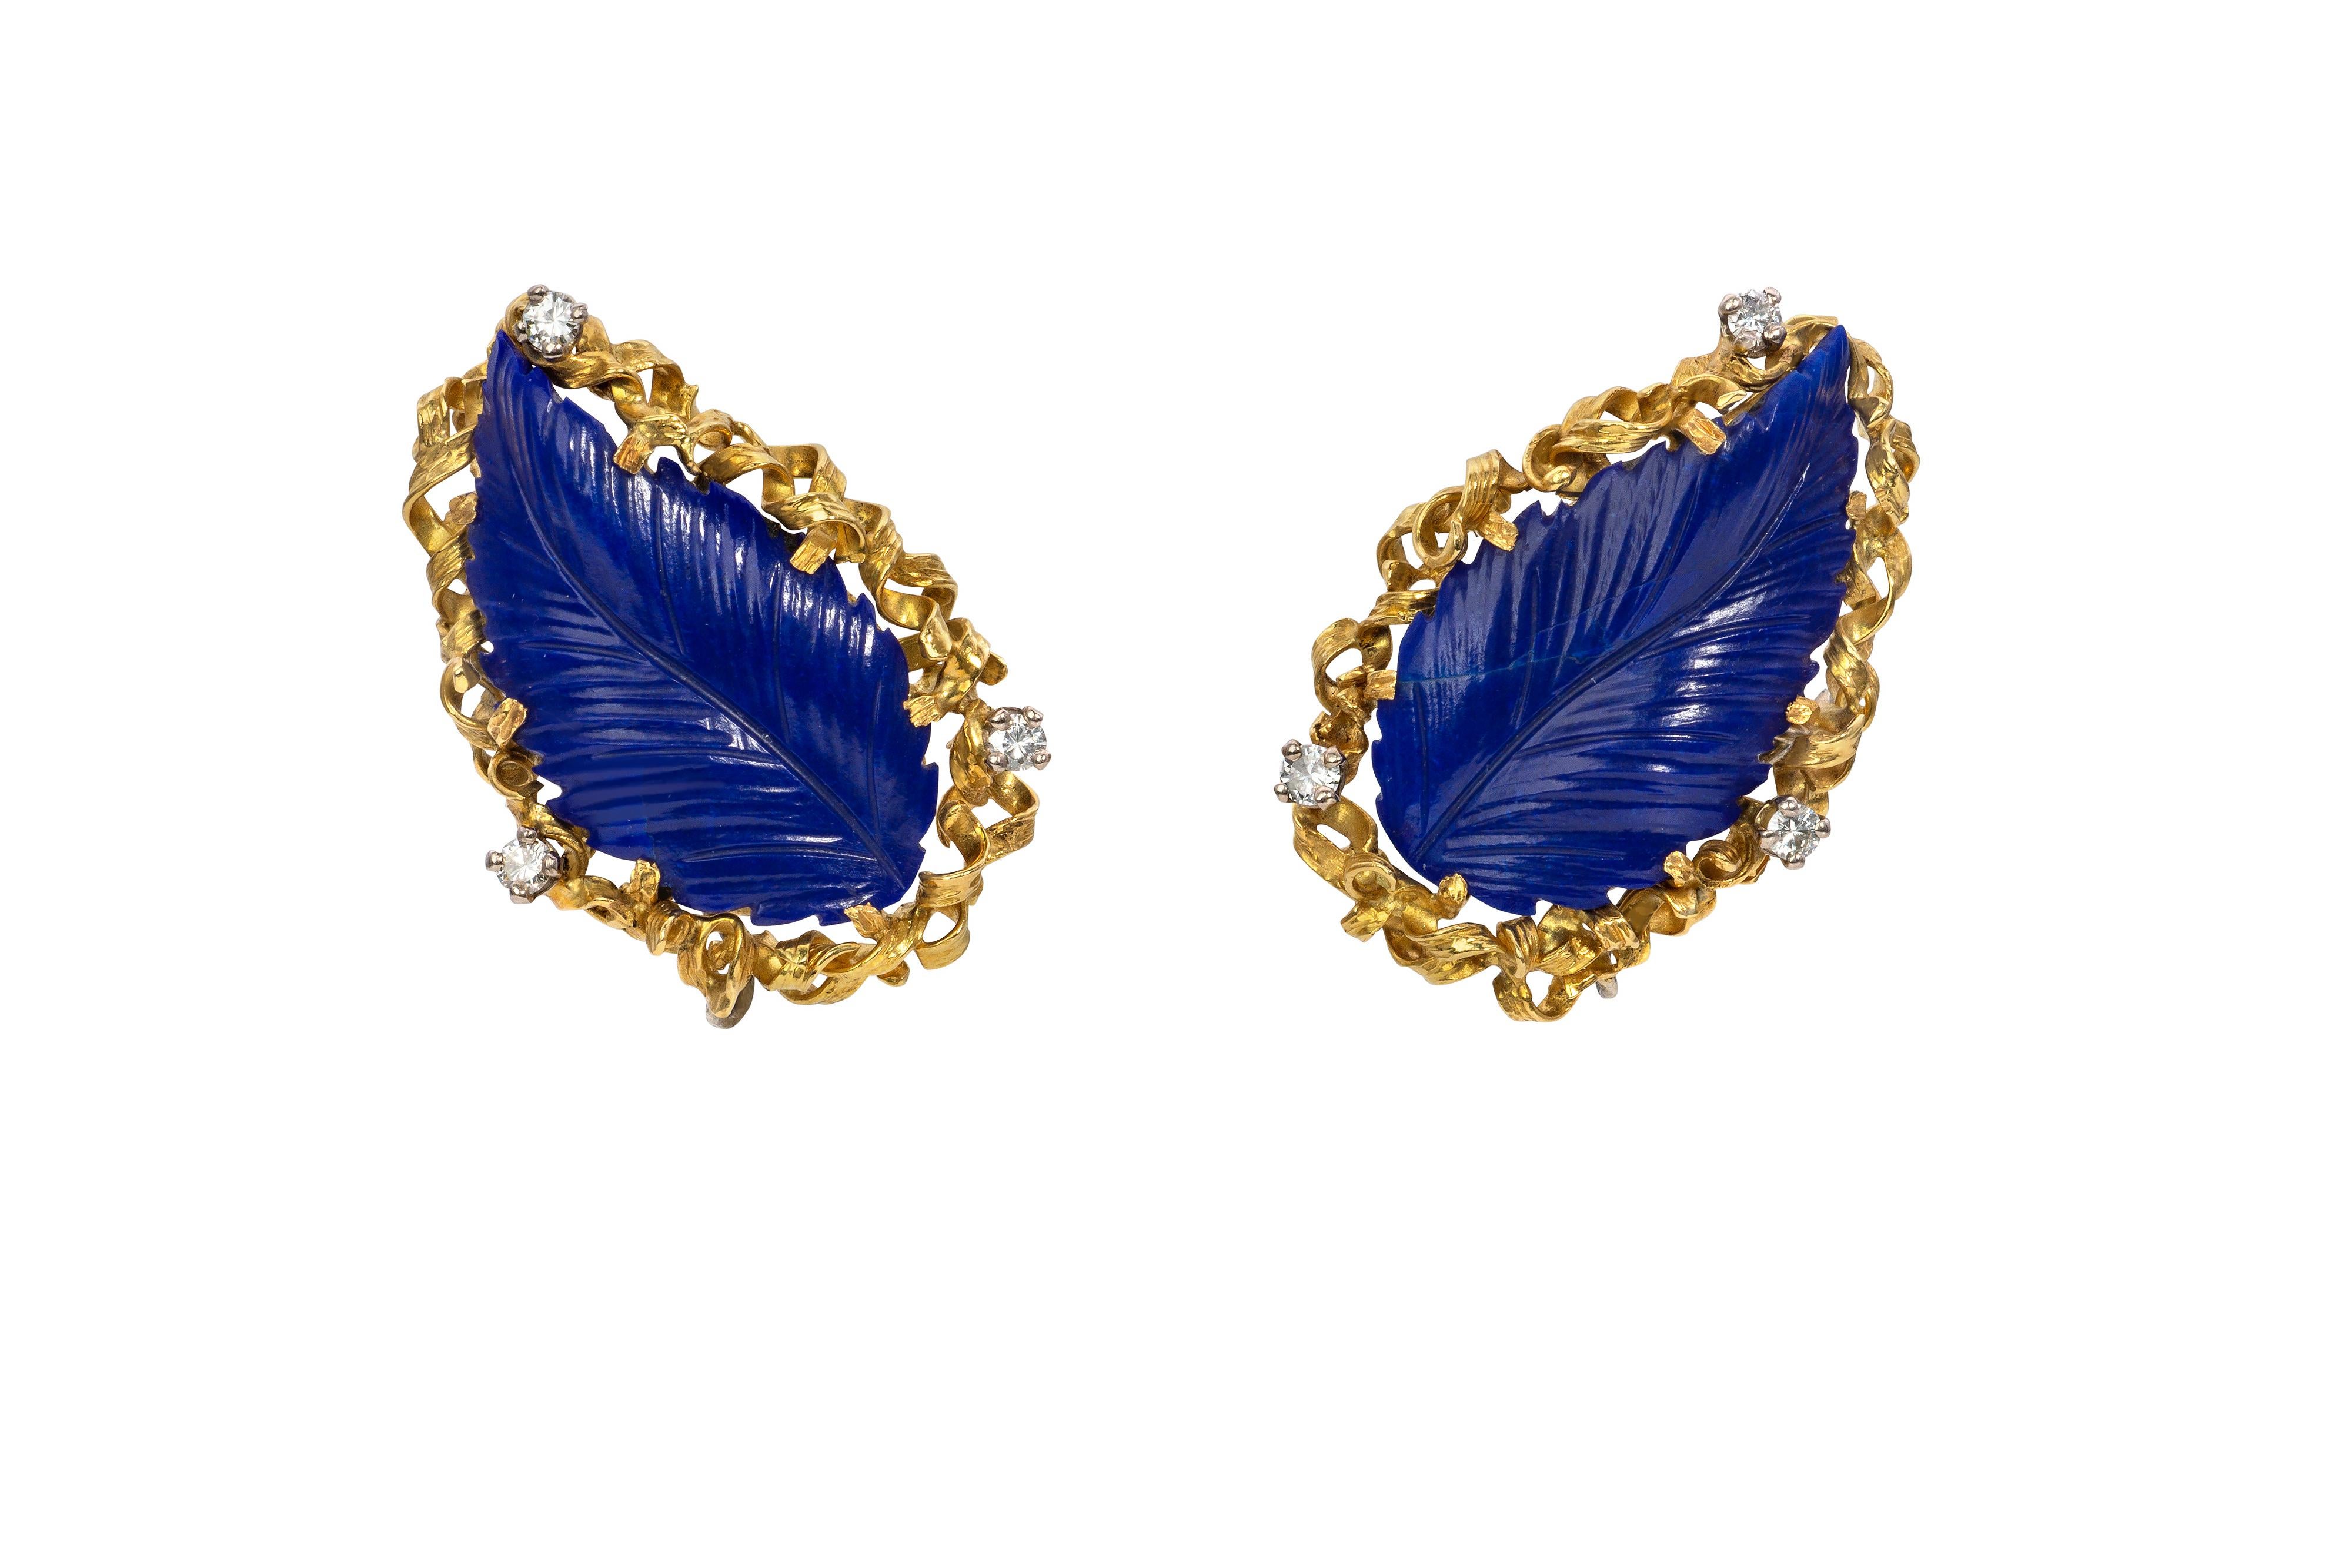 Vintage Carved Lapis Lazuli, Diamond, 18 Karat Yellow Gold Earrings, circa 1975 In Excellent Condition For Sale In New York, NY